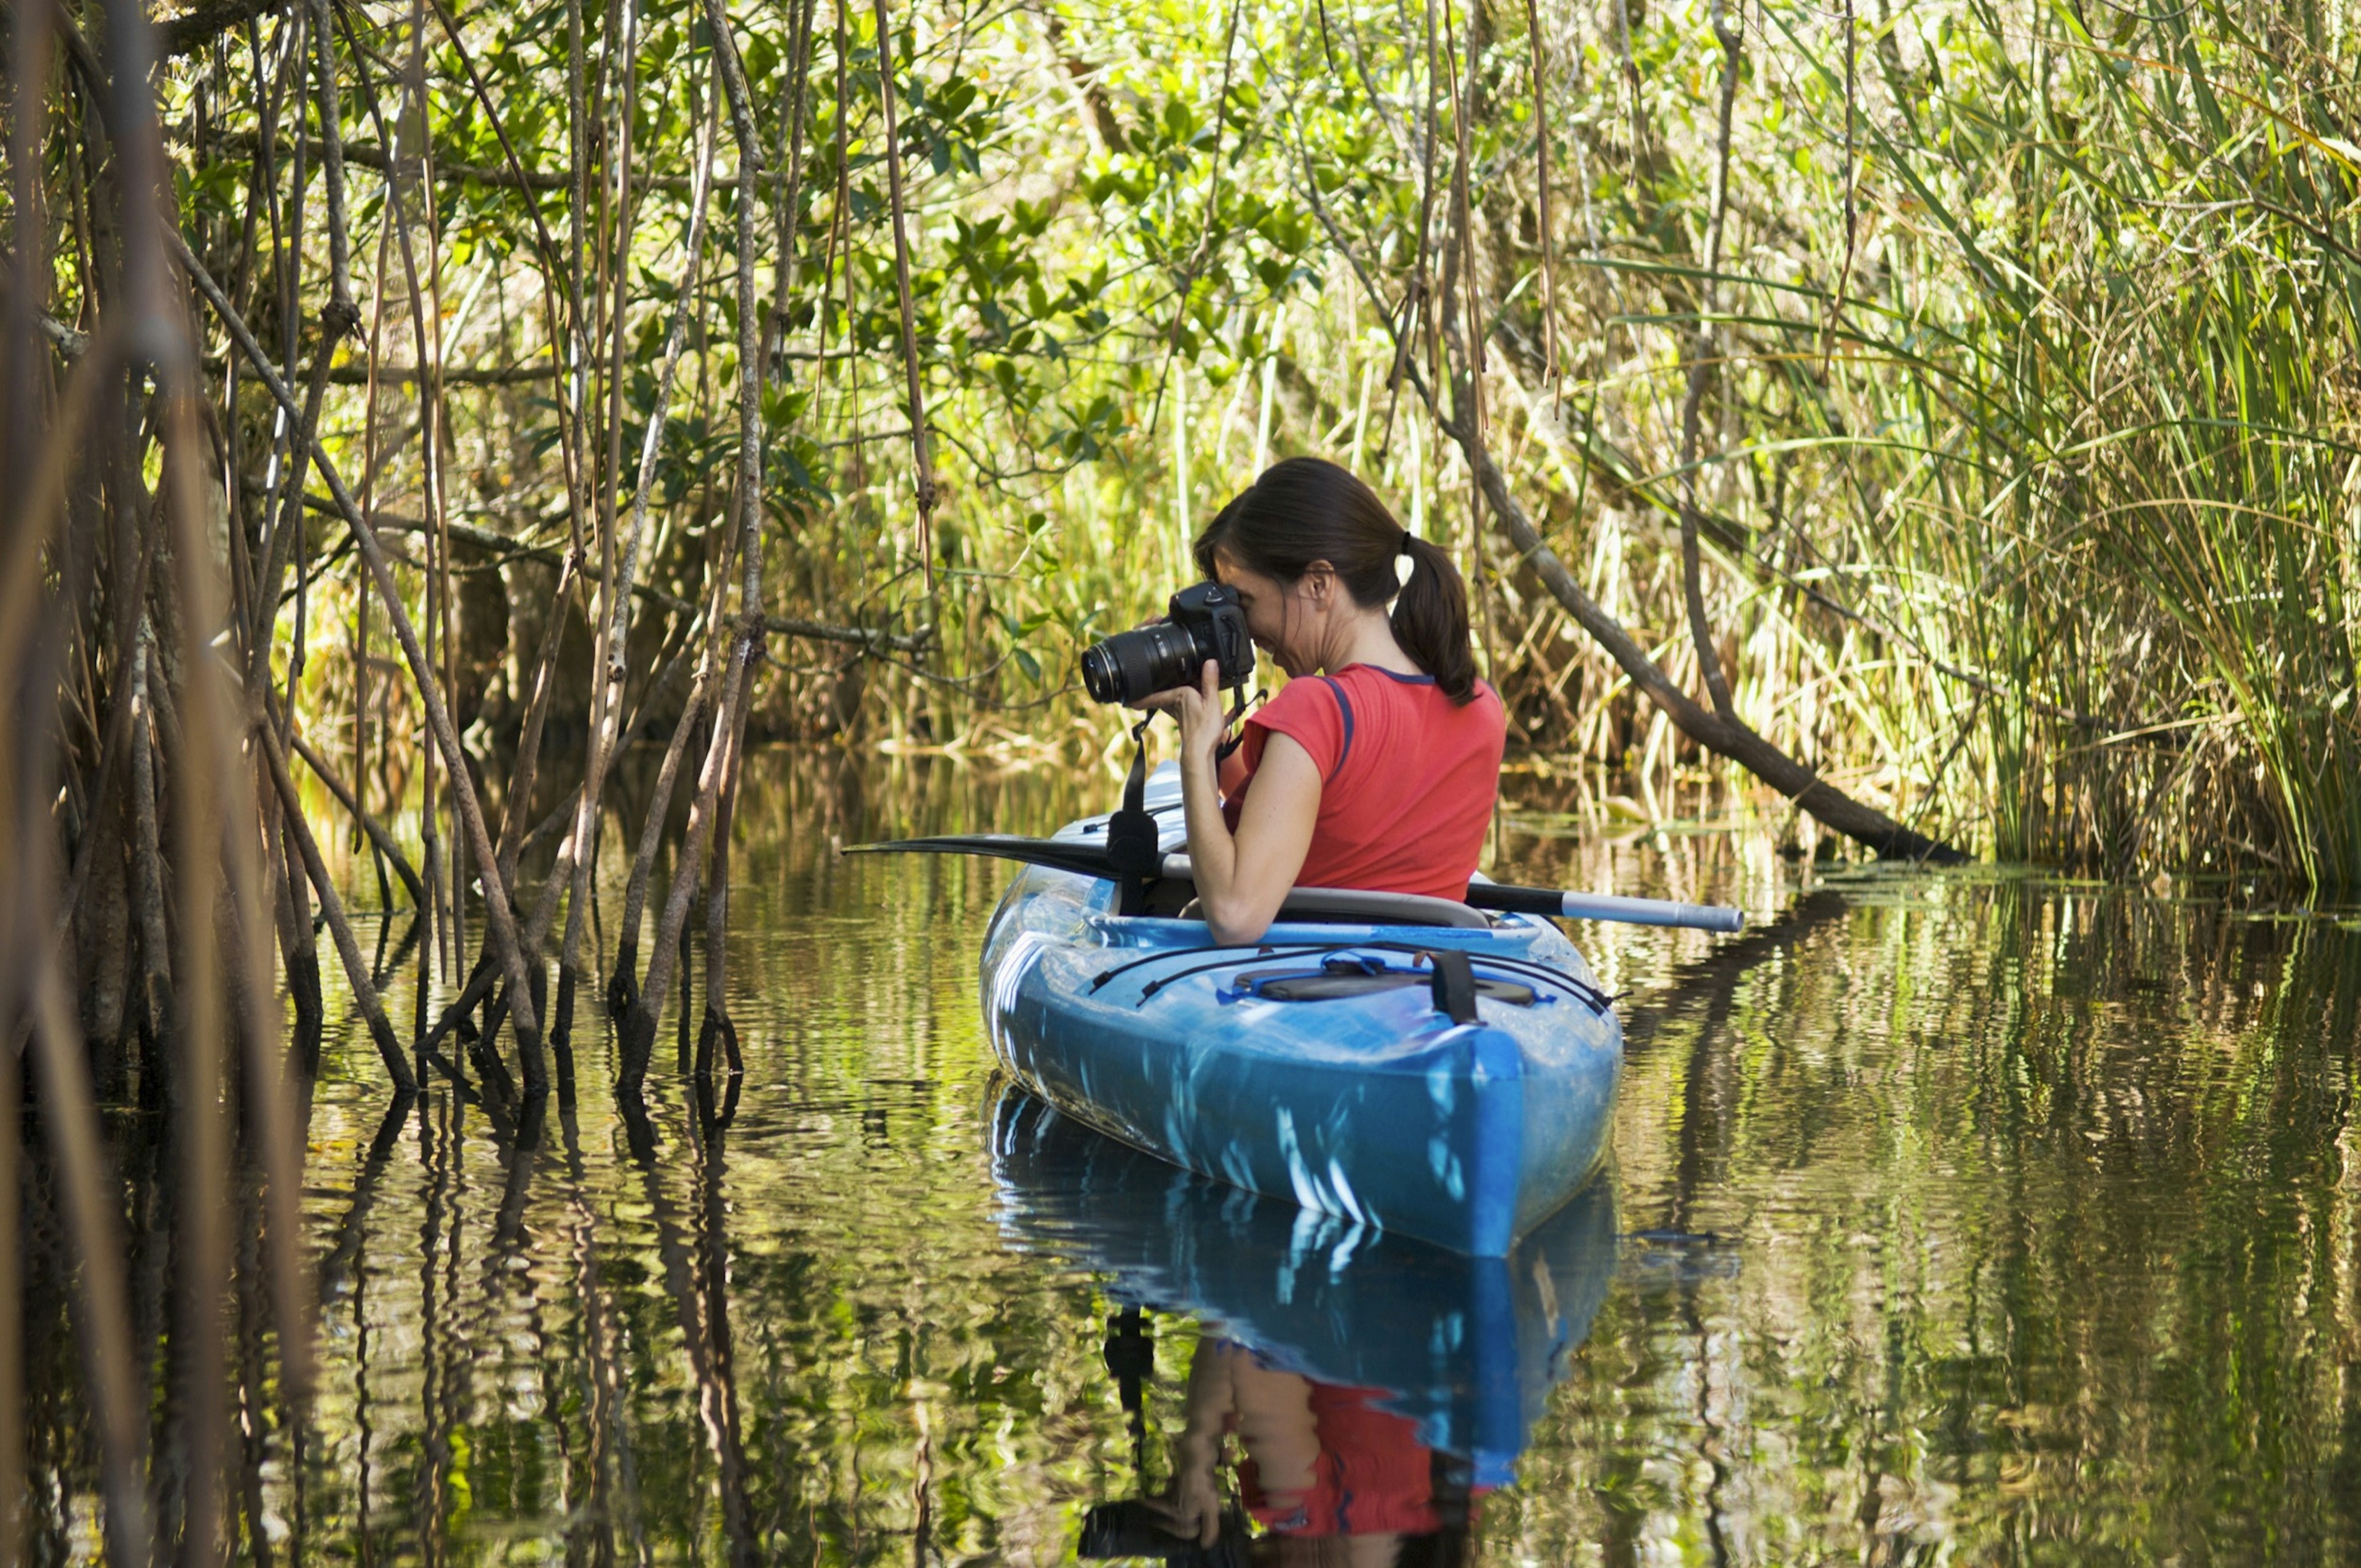 A woman takes a photo from a kayak in the Everglades